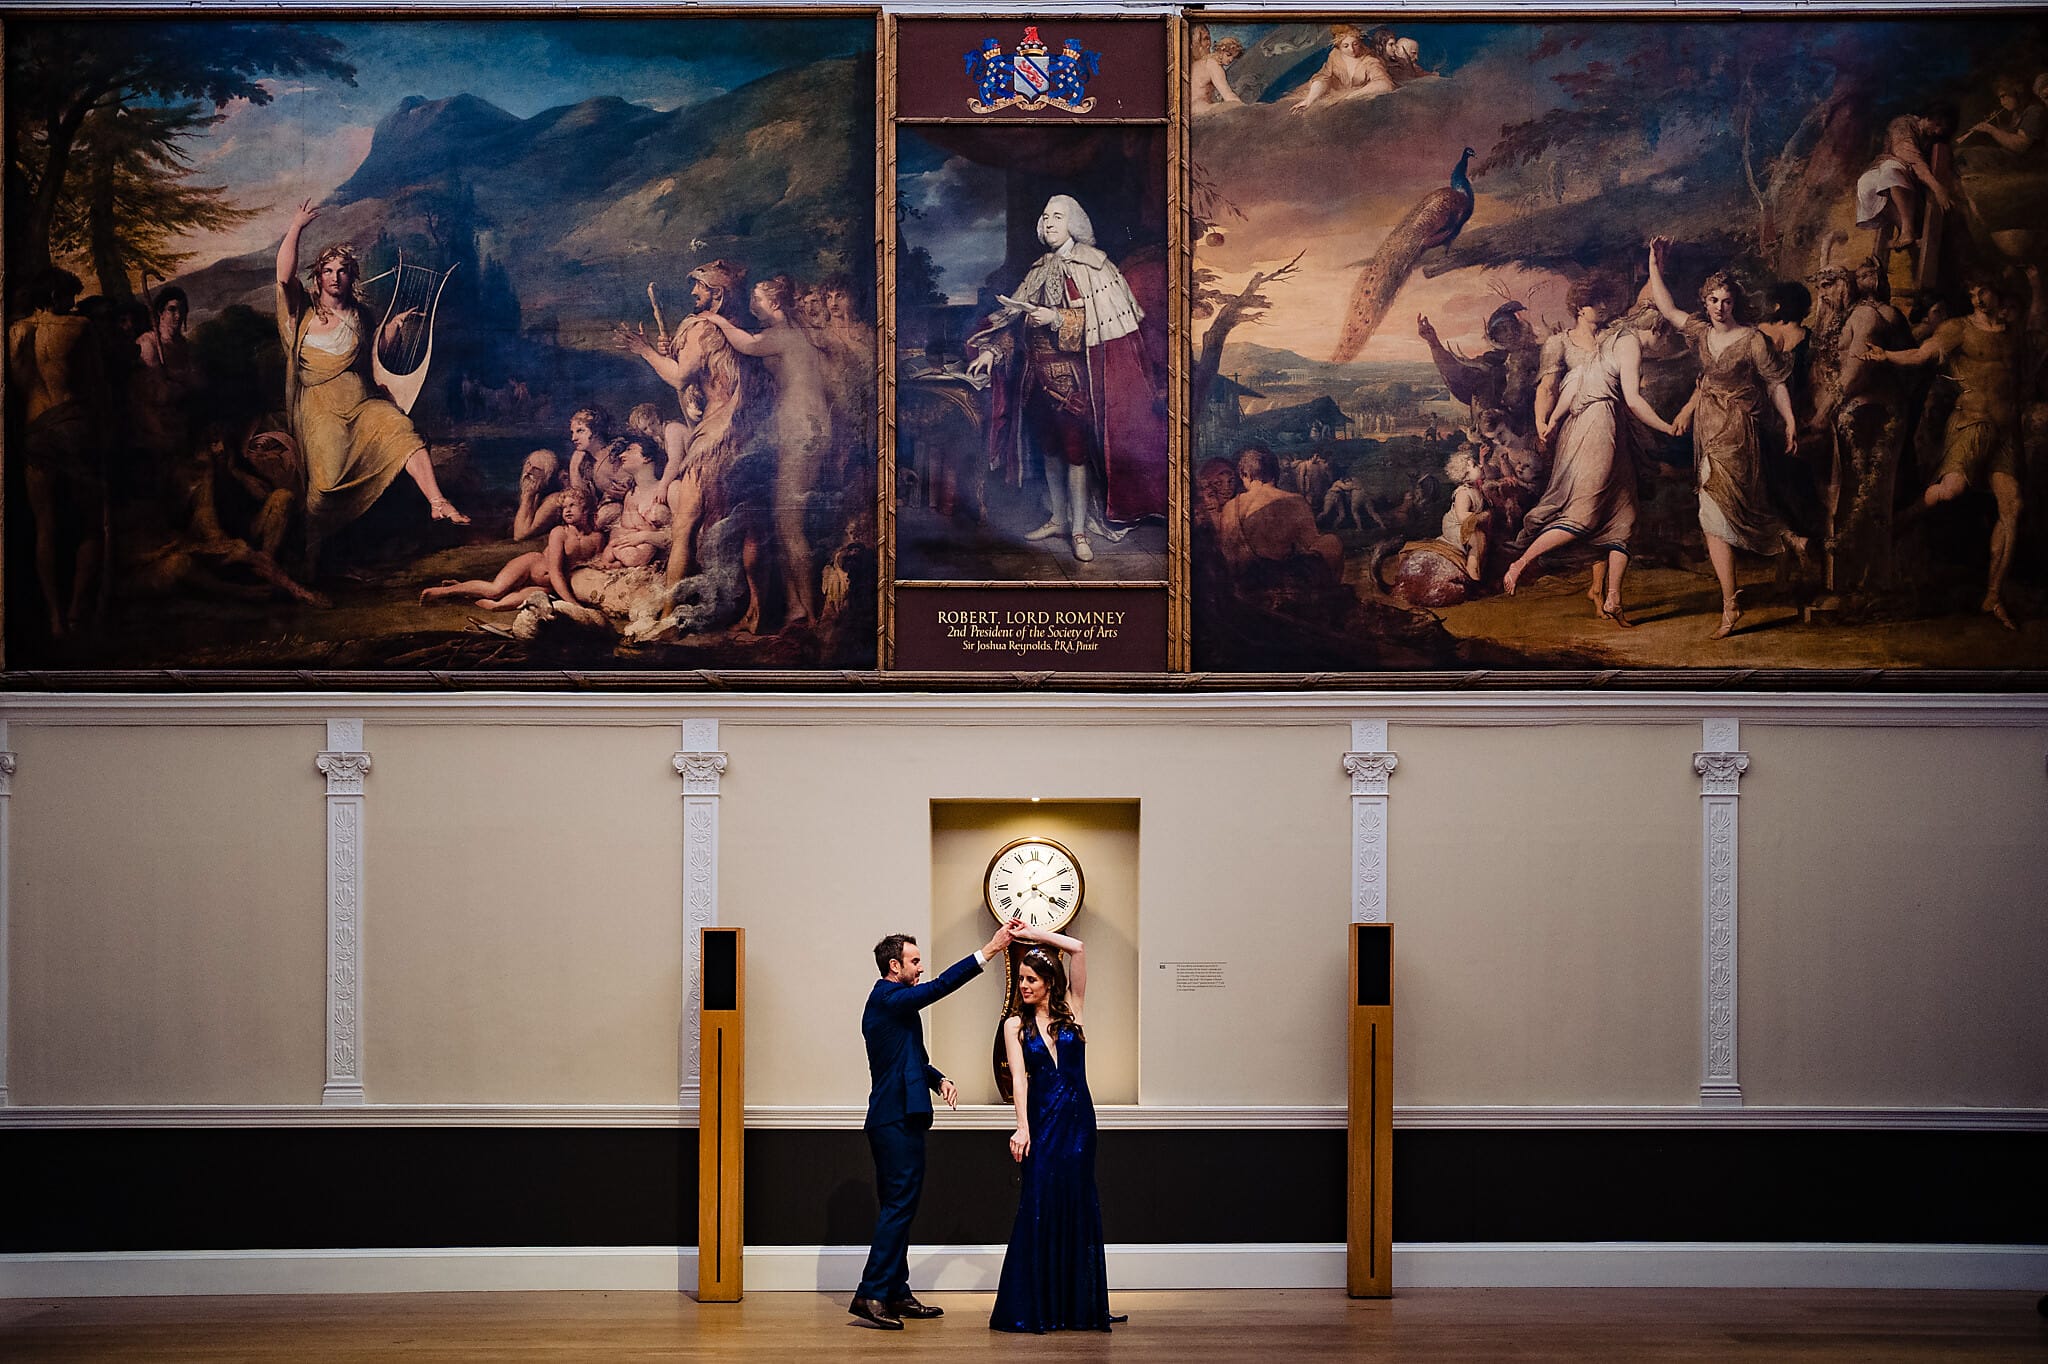 Bride and groom's dance in the Great Room at the RSA